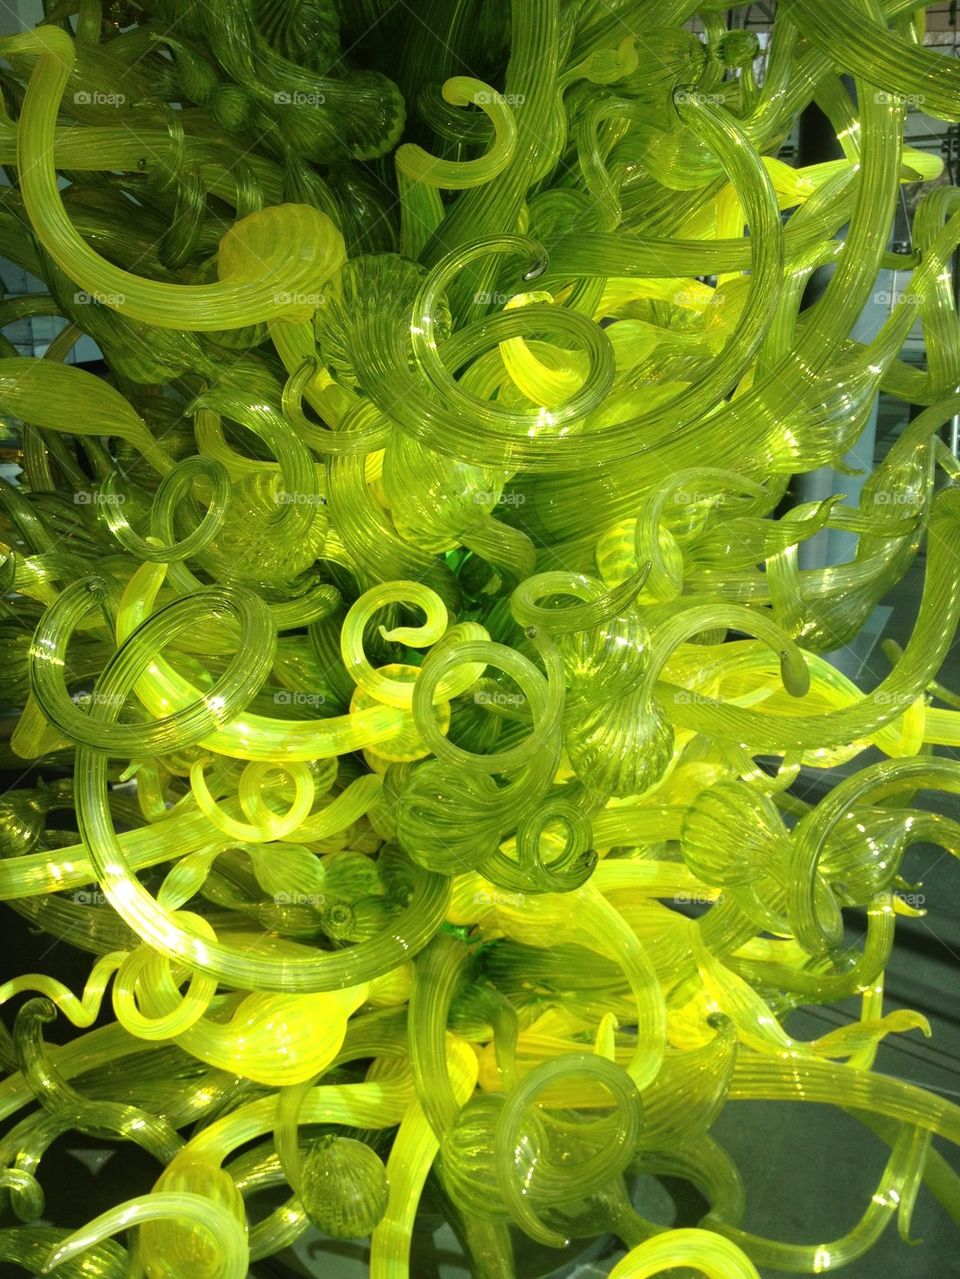 Chihuly Yellow Glass Sculpture